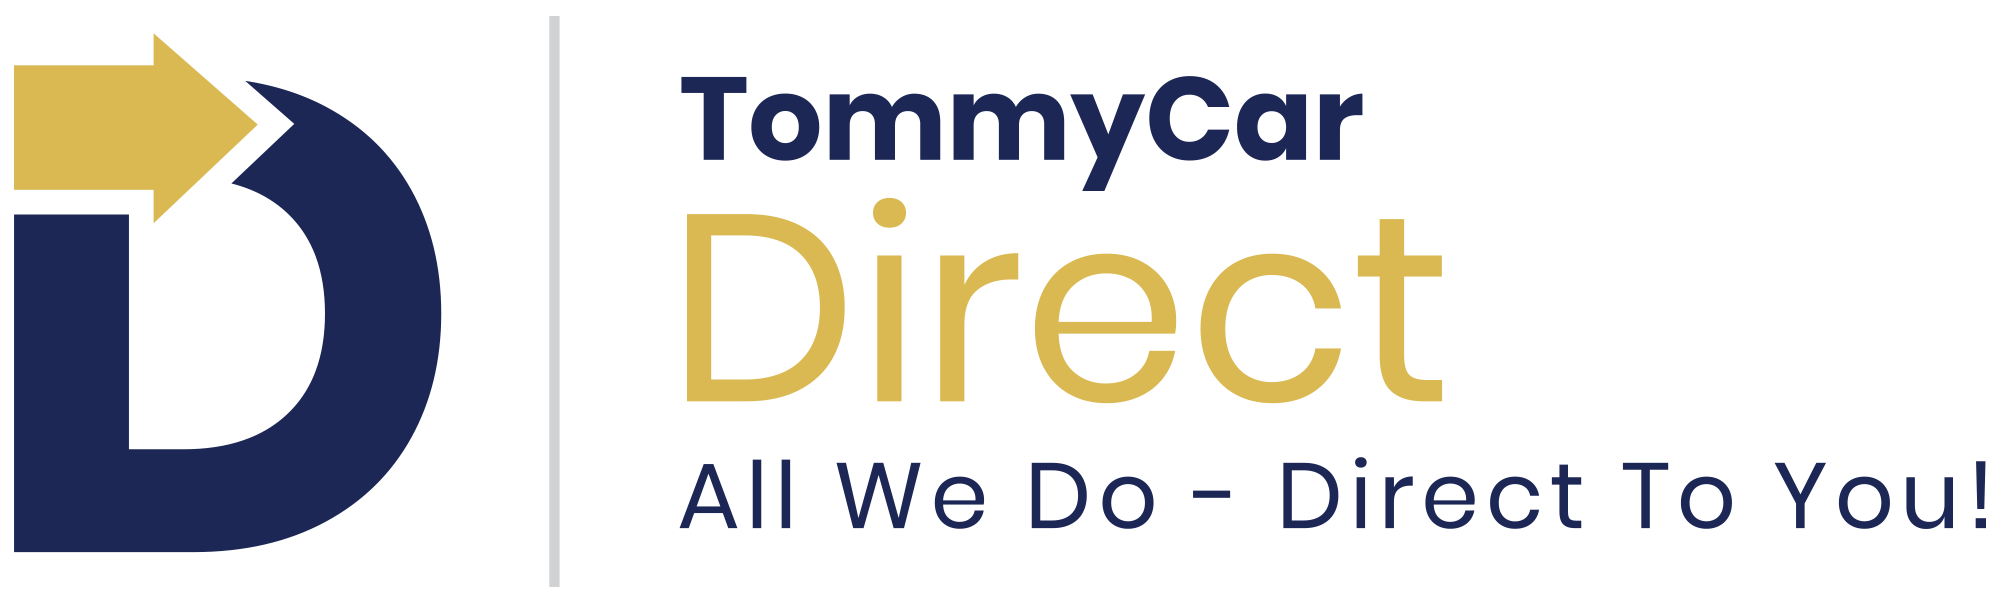 TommyCar Direct